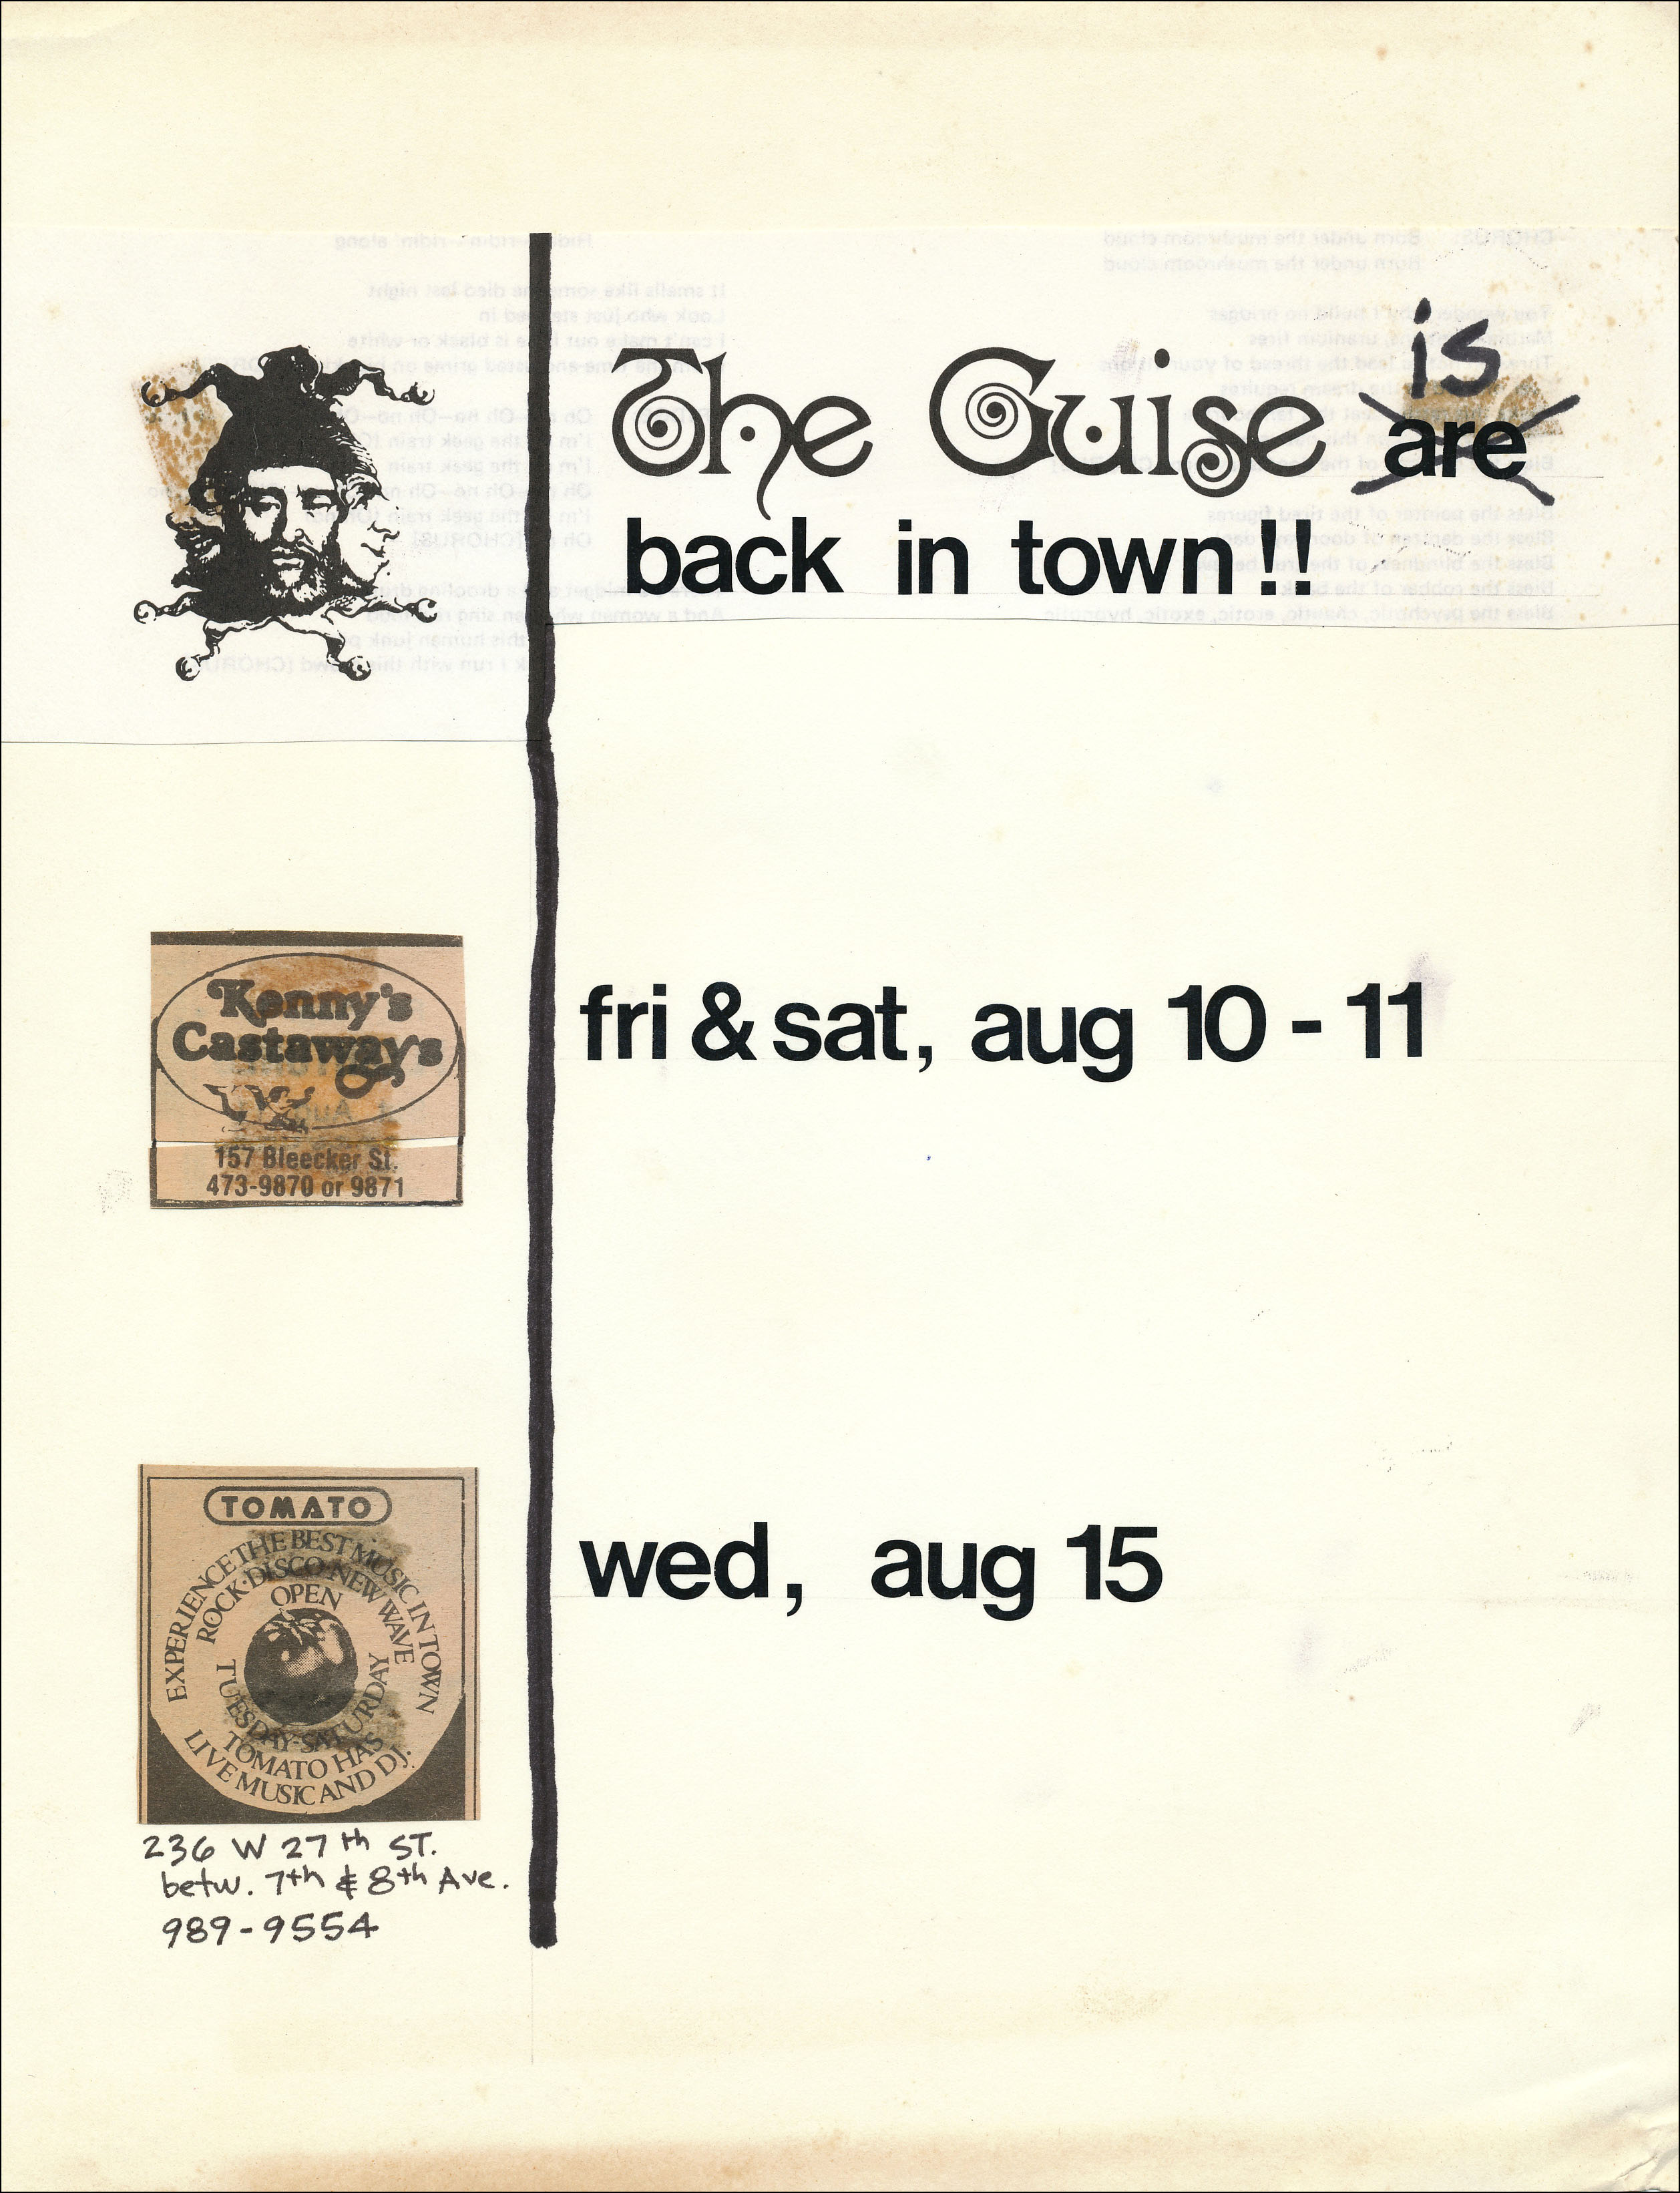 Guise postcard for Kenny's Castaways (08-10-1979 performance) and Tomato (08-15-1979 performance).